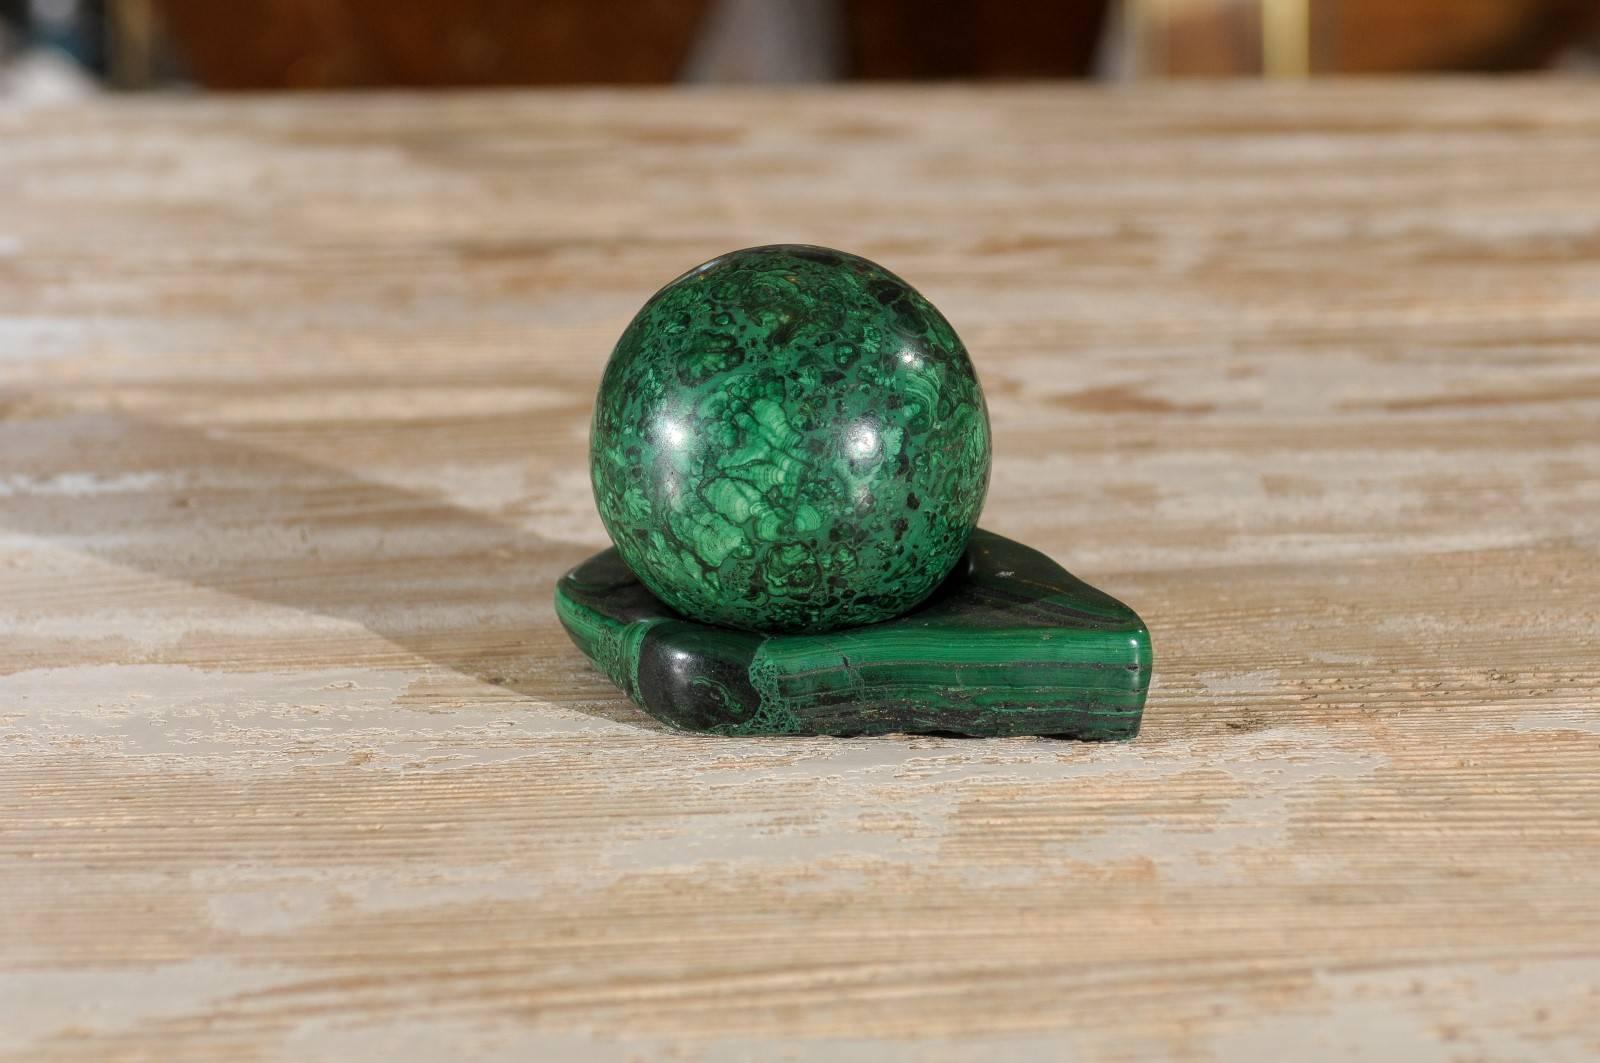 A paperweight or desk accessory in two parts made of solid malachite. The upper is a near round polished ball and it rests on a polished base hallowed slightly to hold it securely.